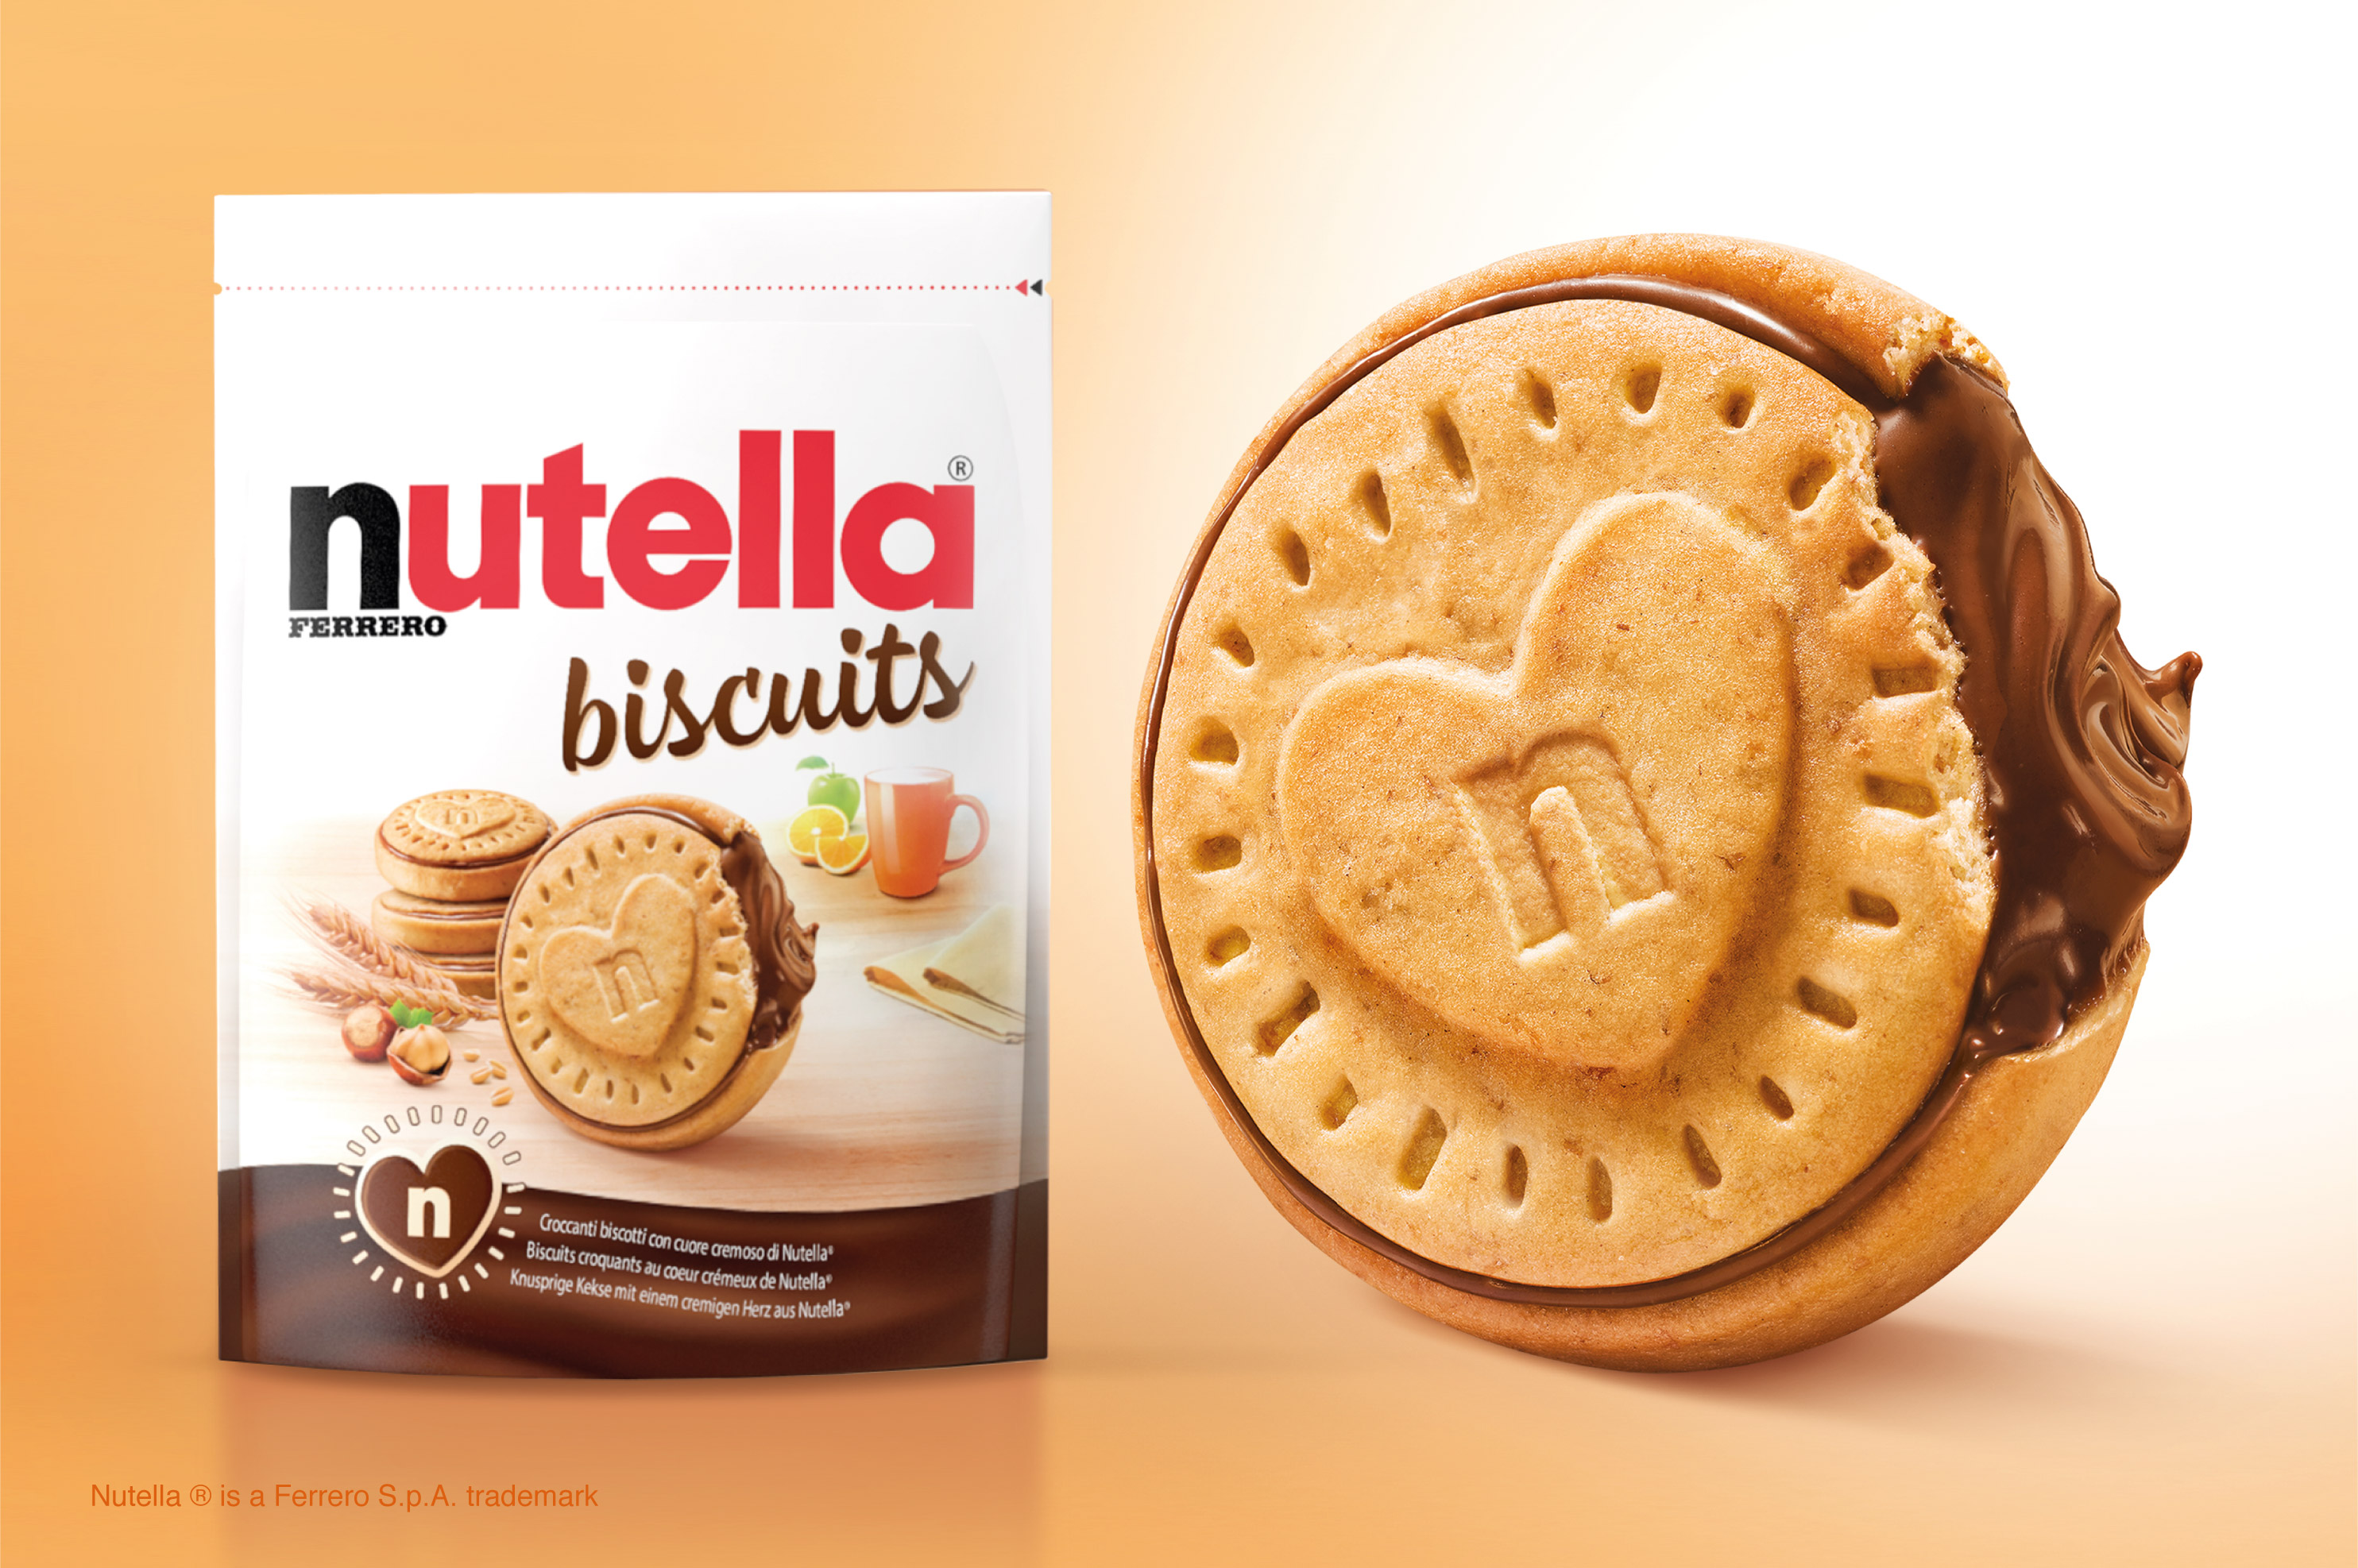 Nutella biscuit pack next to a giant shortbread Nutella biscuit